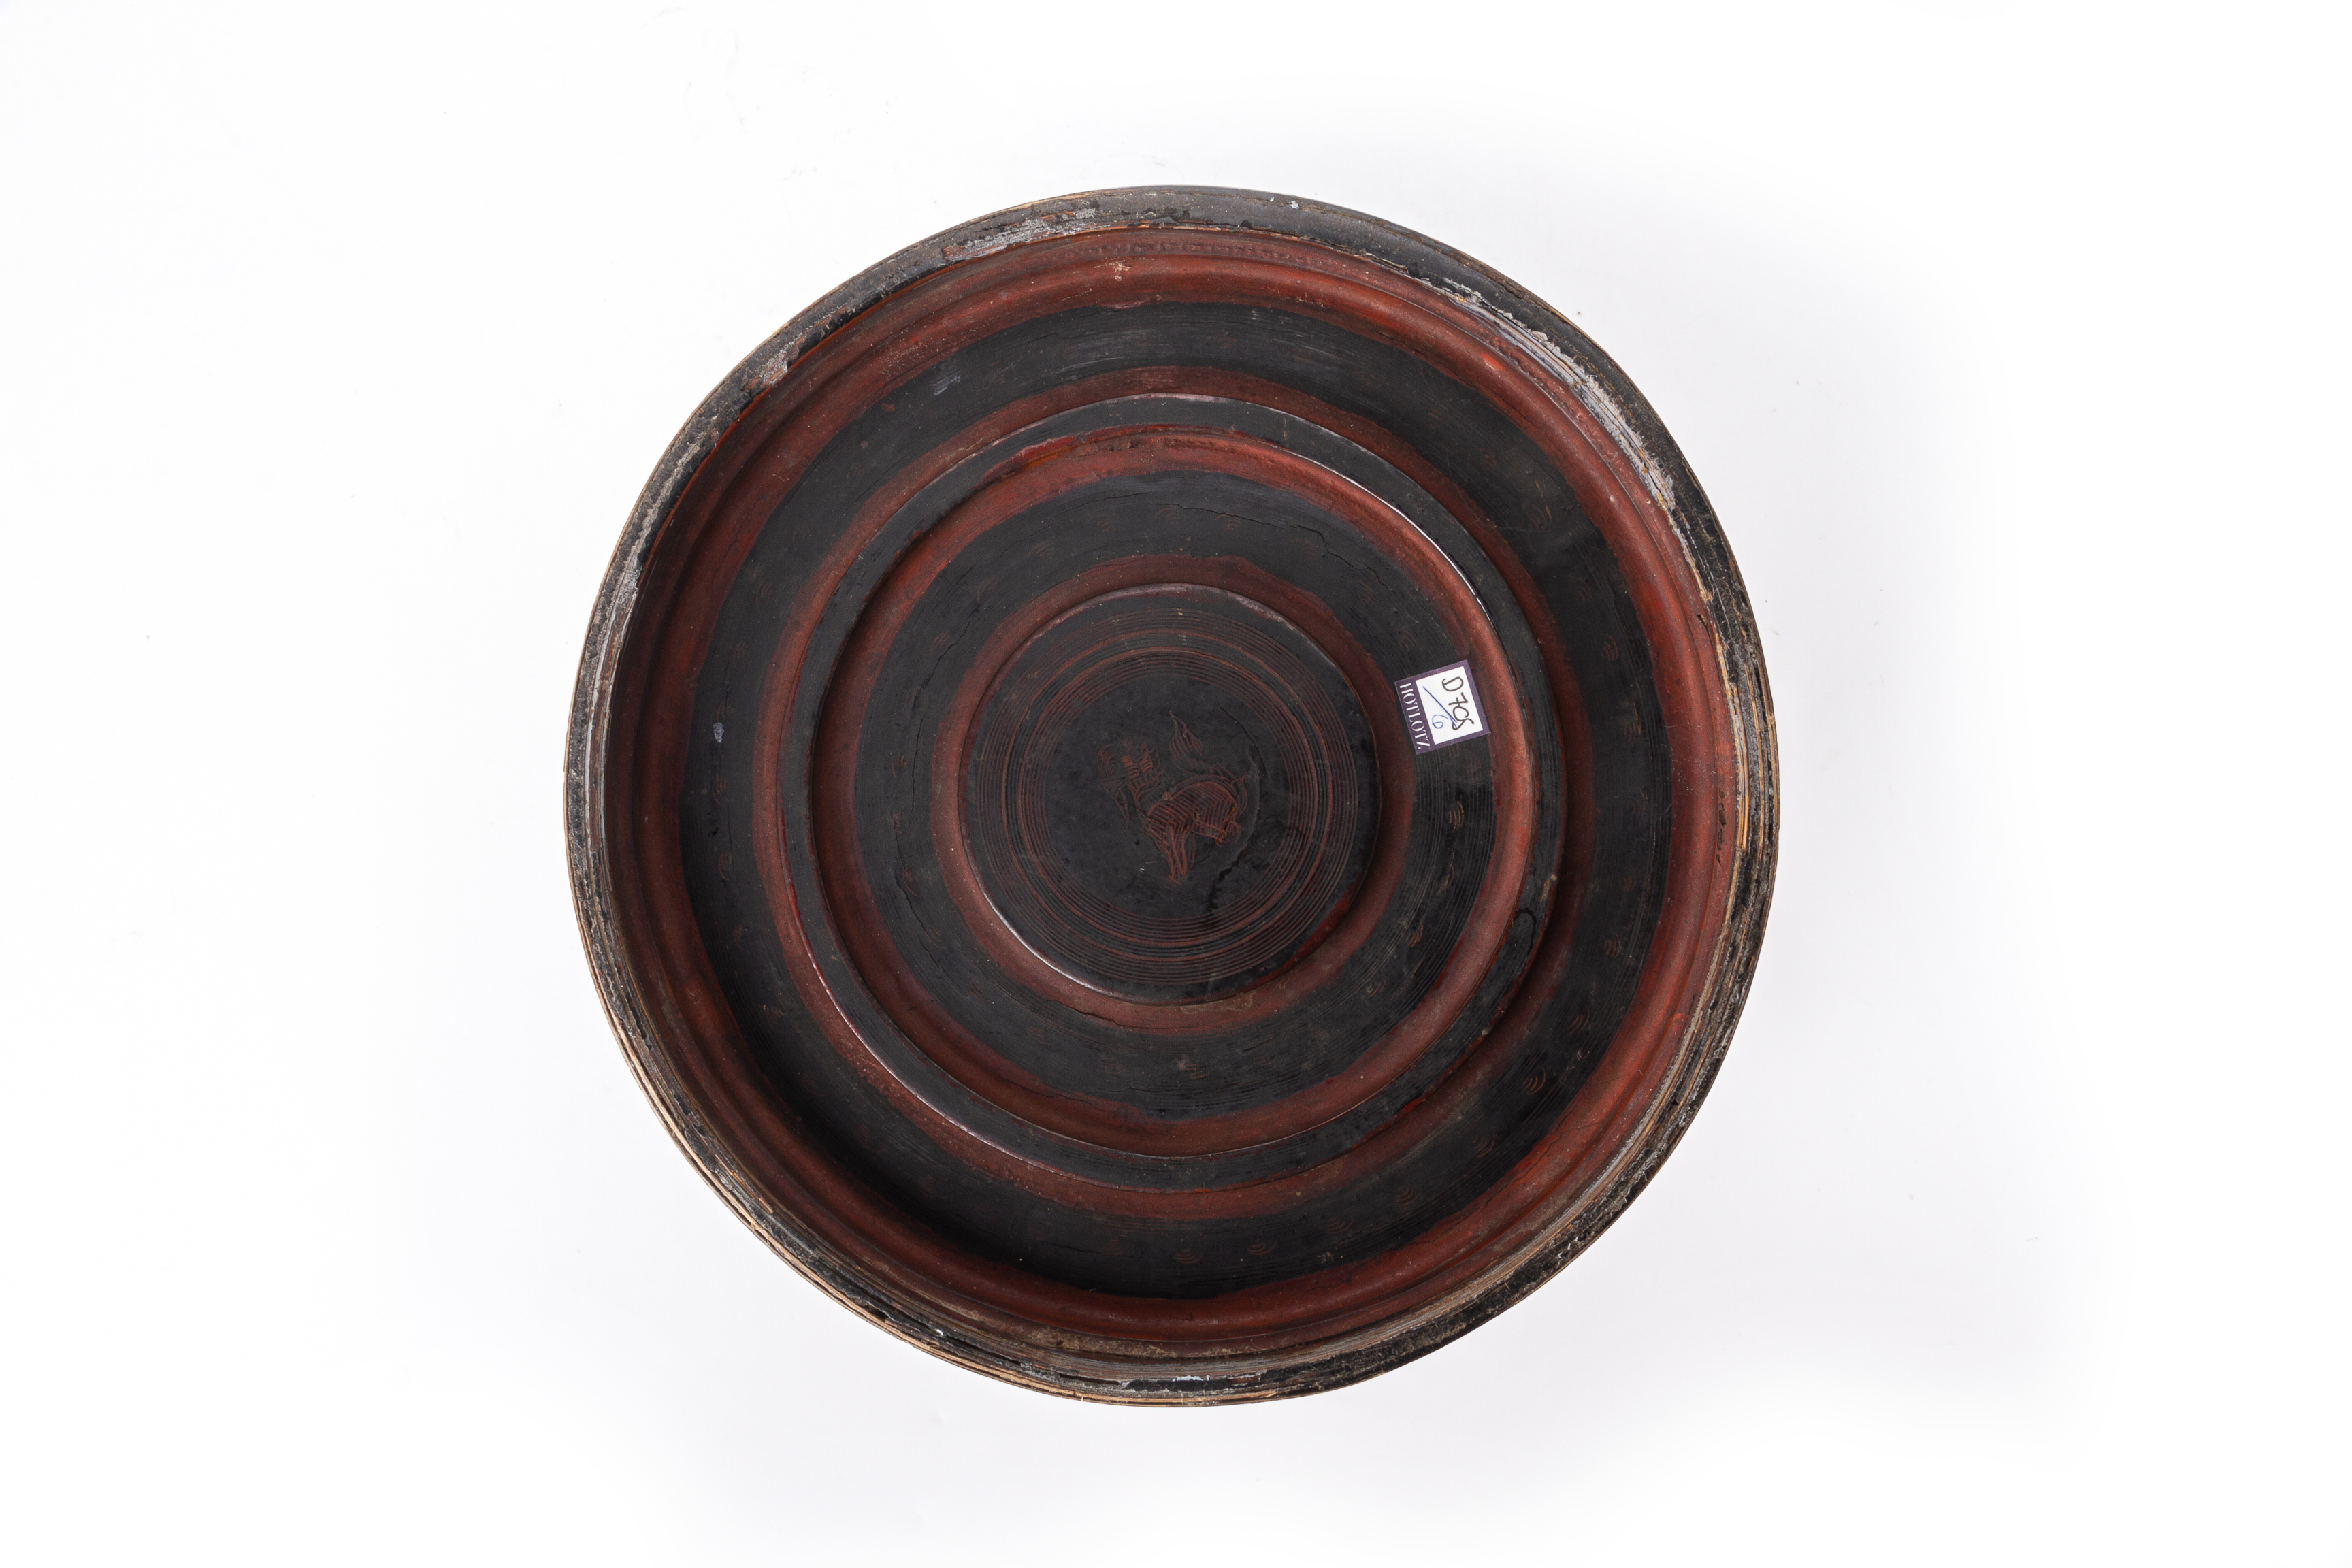 A BURMESE RED LACQUER CYLINDRICAL BETEL BOX - Image 3 of 3